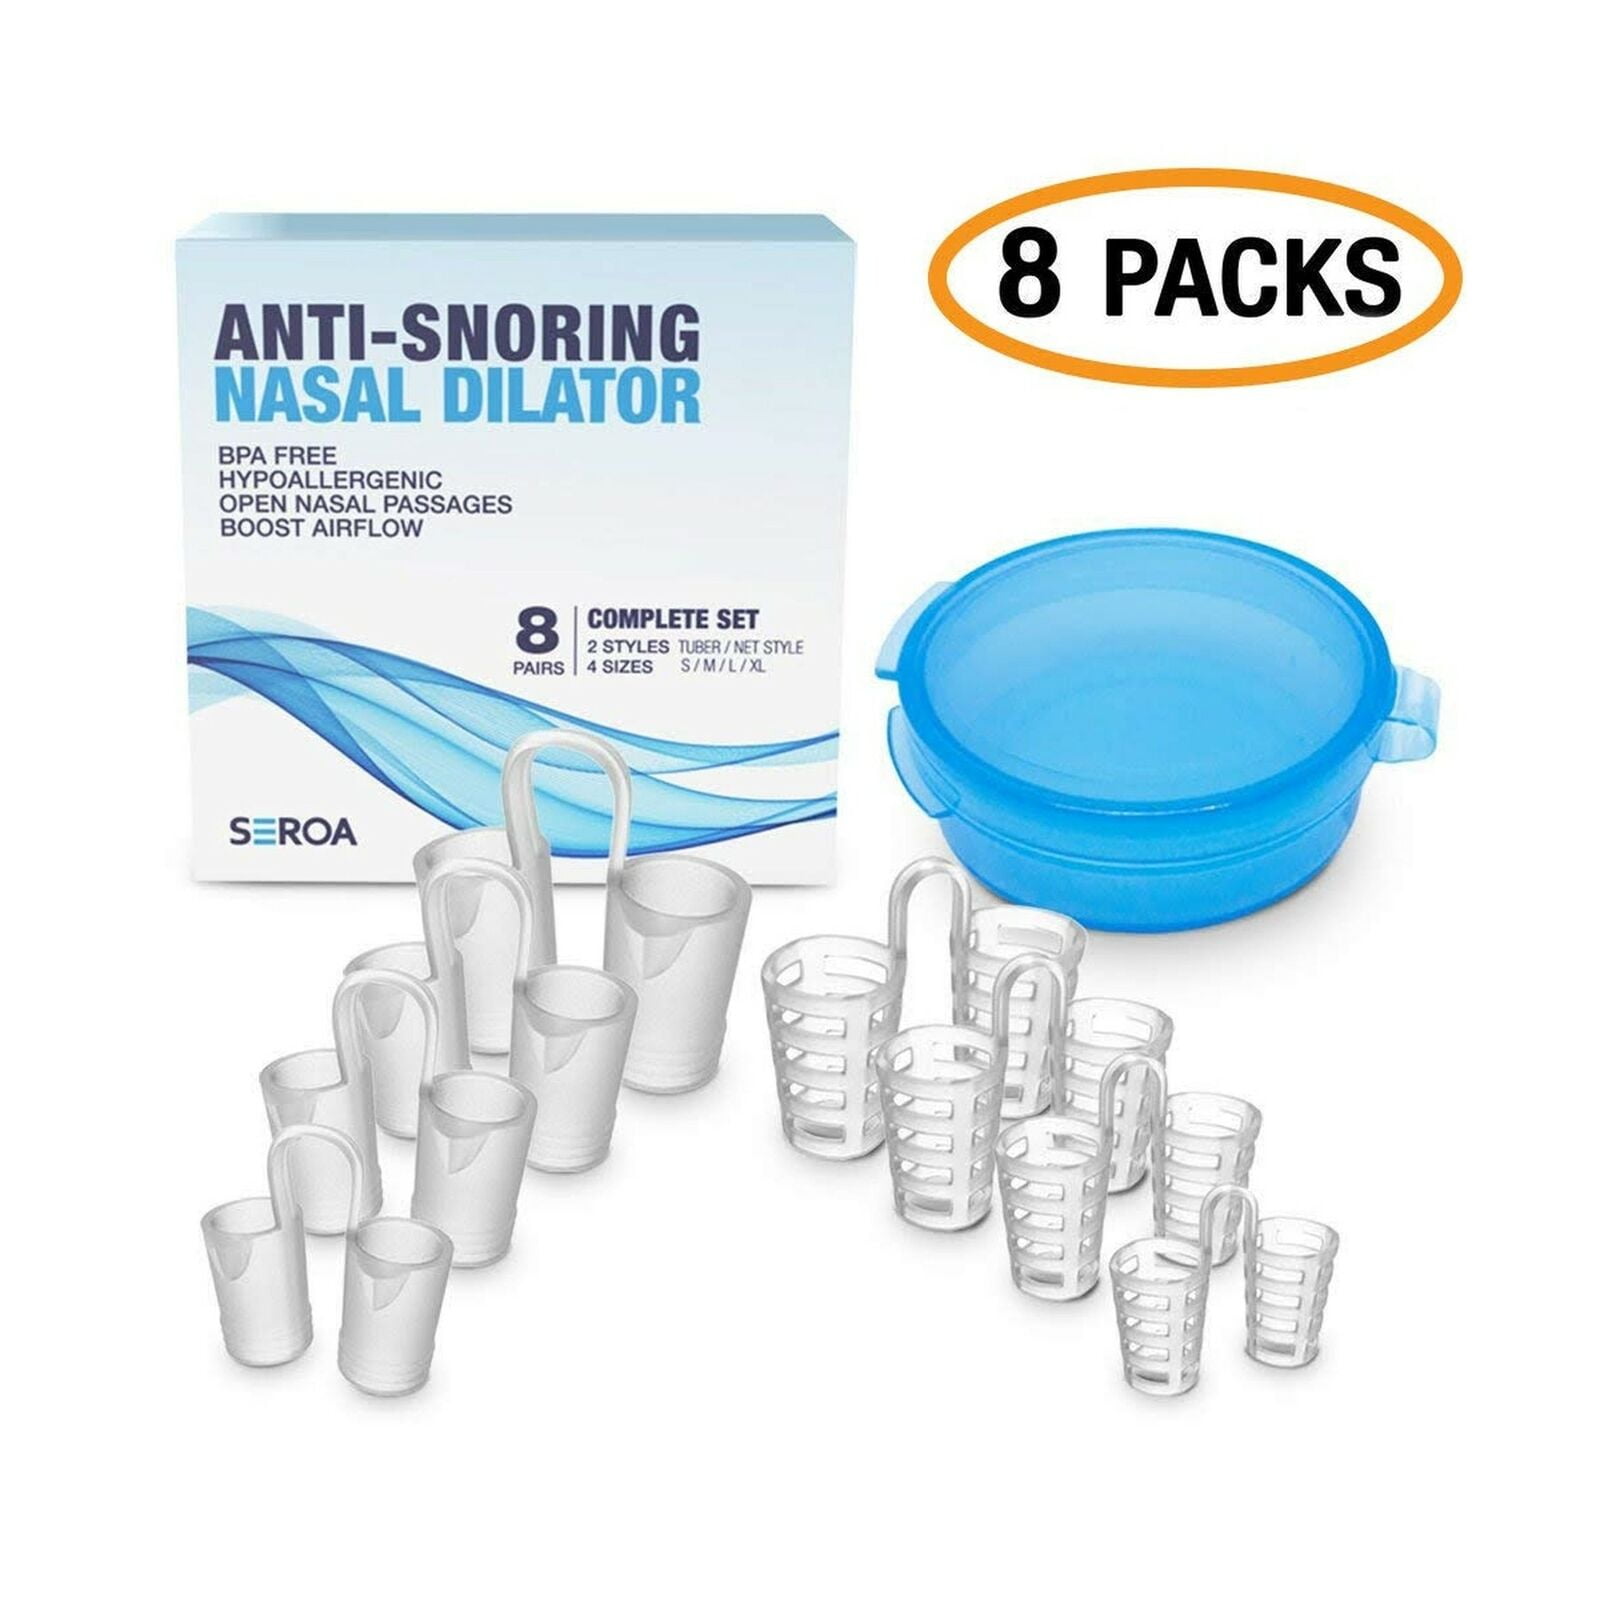 Premium Anti Snoring Devices Nose Vents Nasal Dilator, Stop Snoring Solution for Comfortable Sleeping, Snore Stopper, Ease Breathing and Prevent Snoring Aids, Snoring Relief – 2 Types, 8 Packs